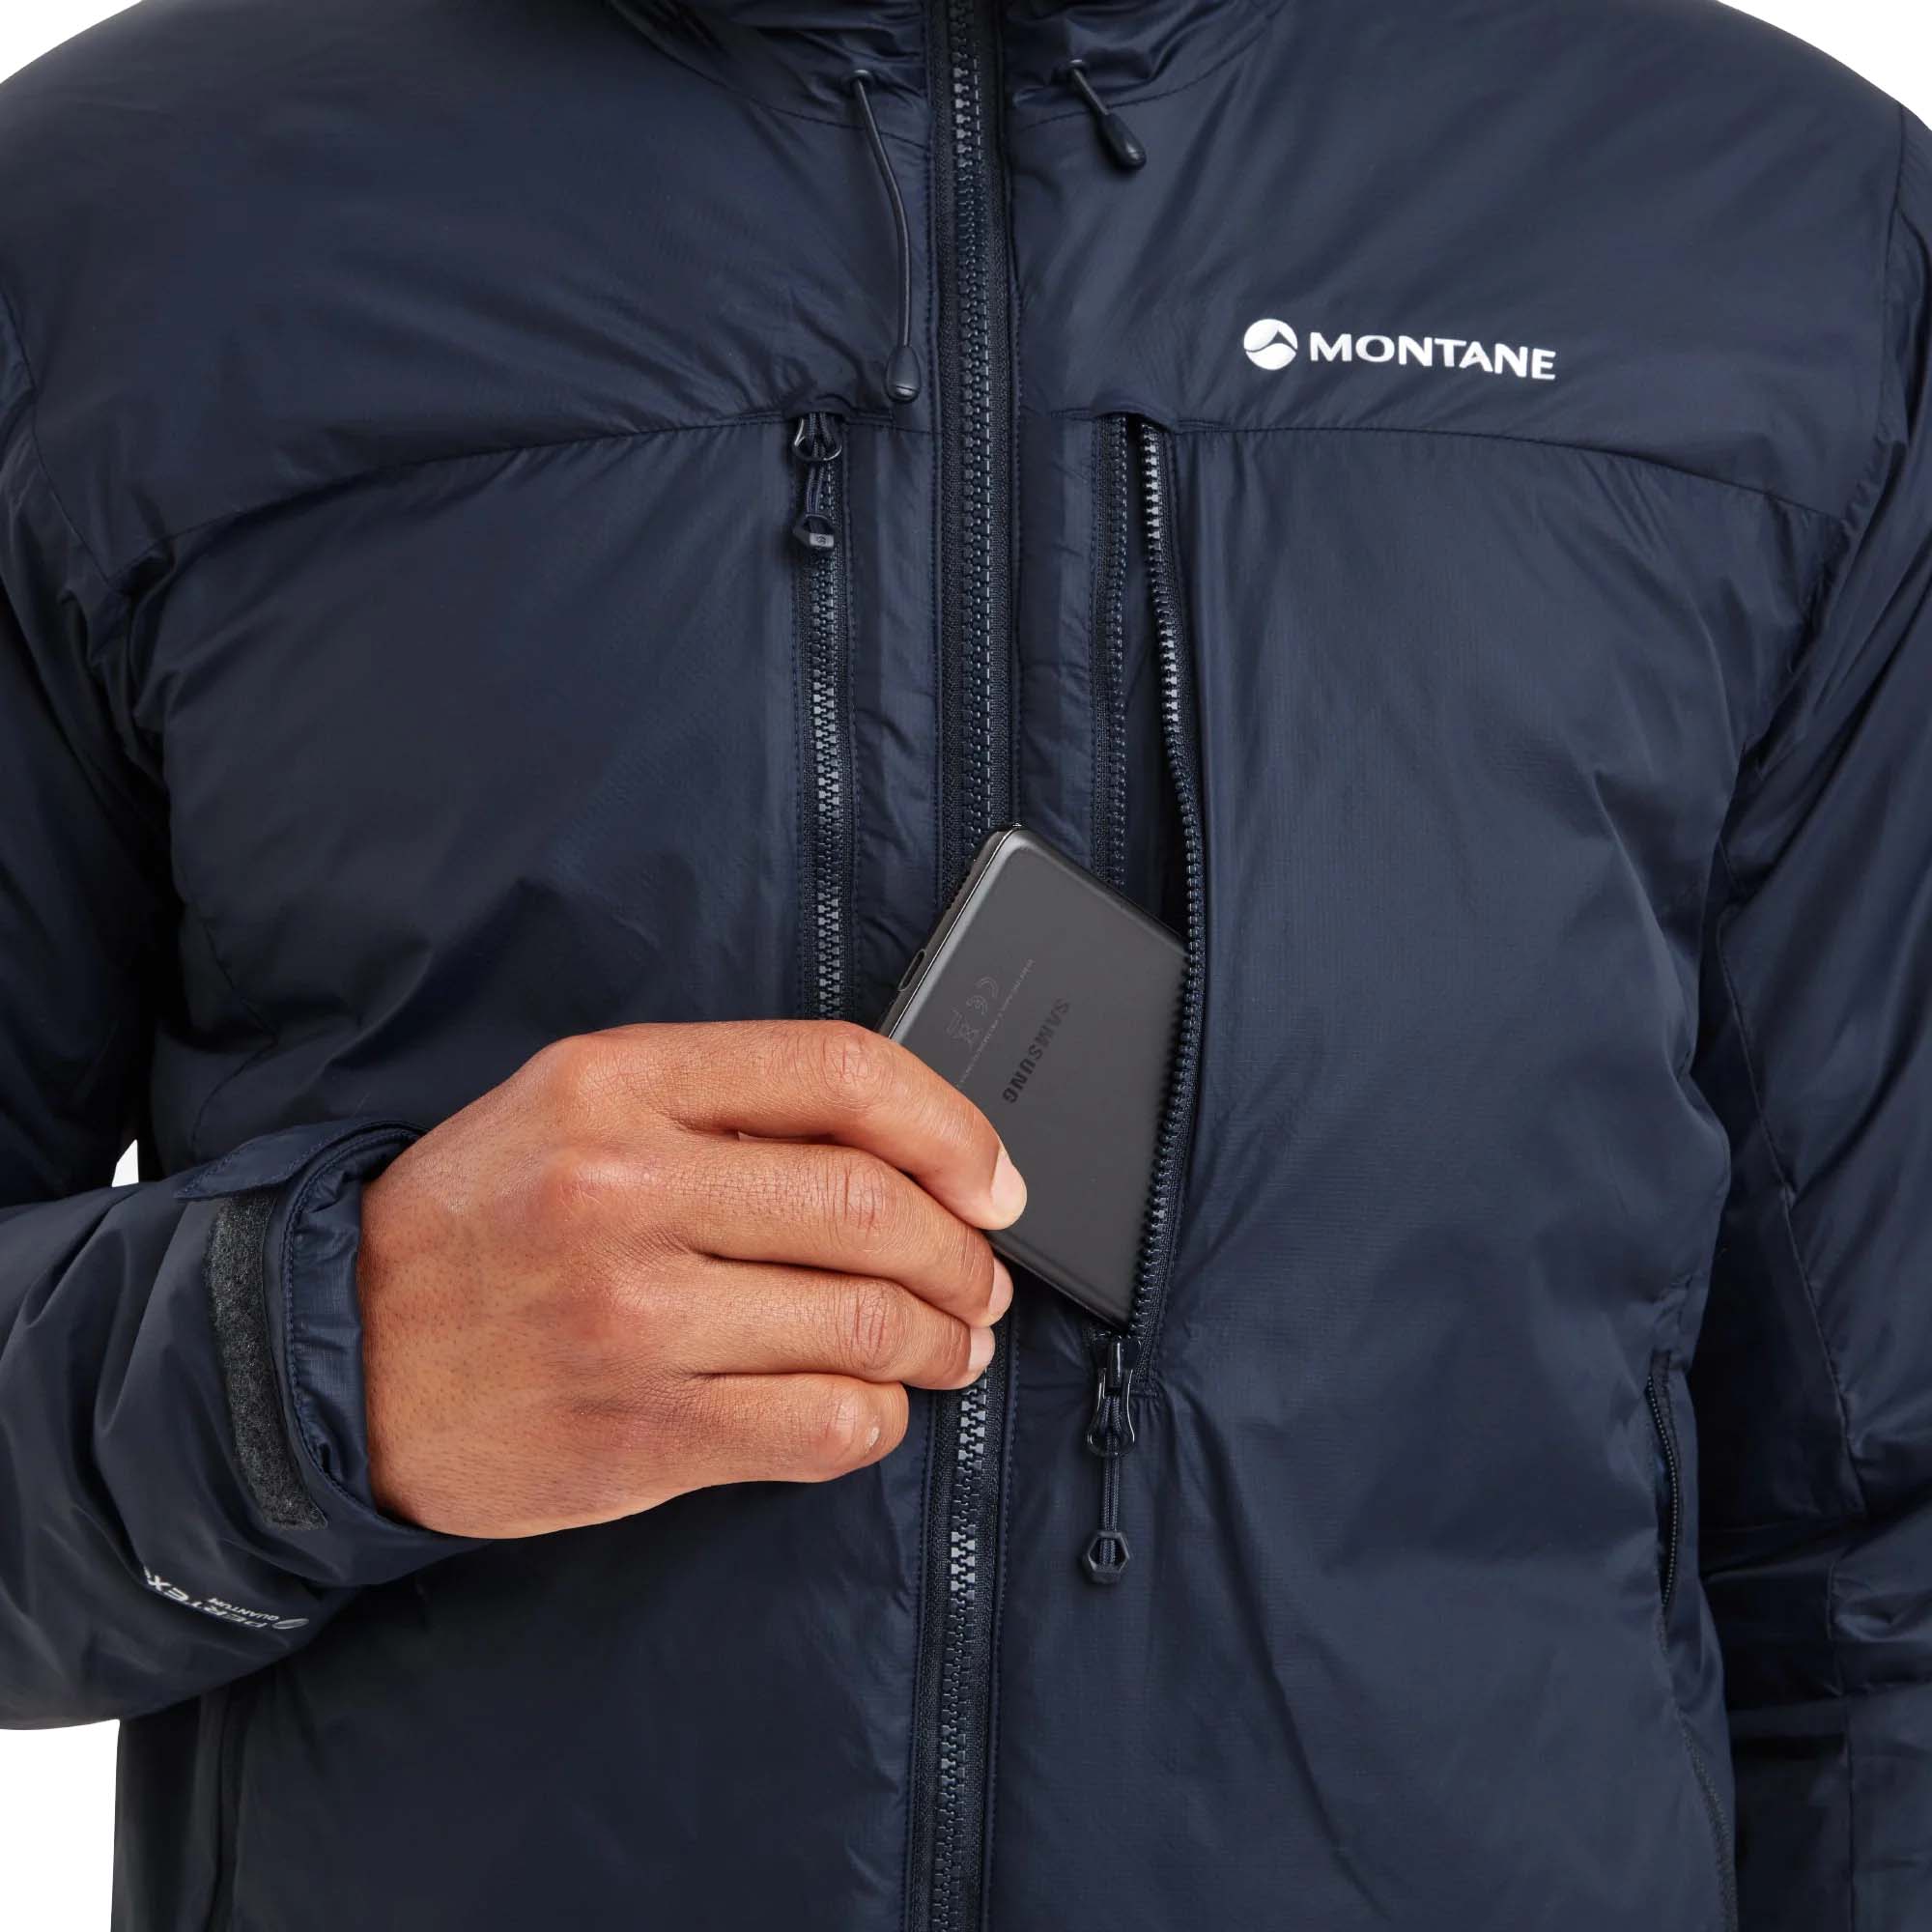 Montane Respond XT Insulated Hooded Jacket